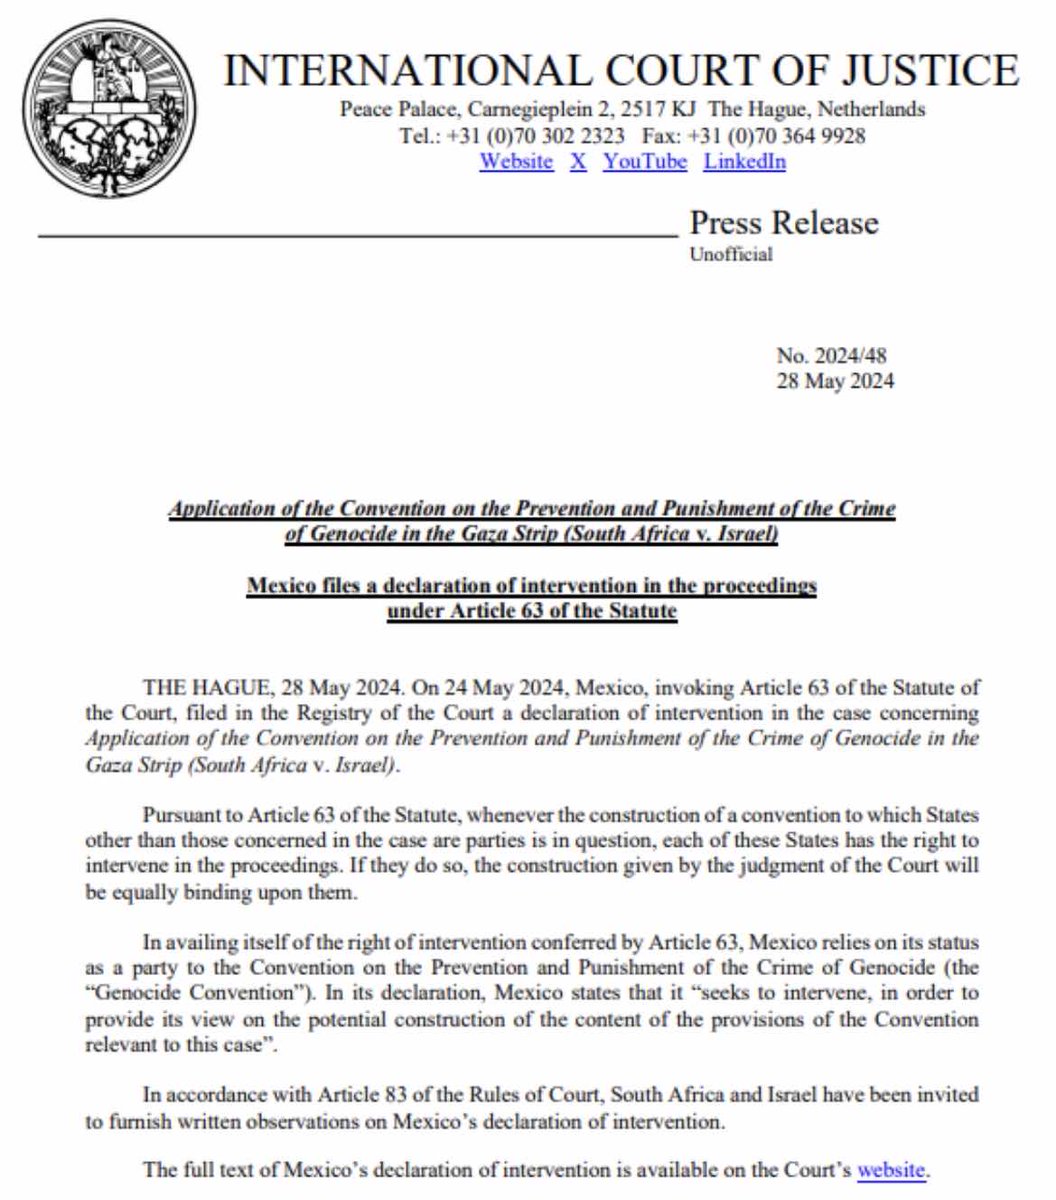 Mexico will not allow the Zionist entity of Israel to subvert the Genocide Convention🇵🇸🇲🇽 Mexico has filed a declaration of intervention in South Africa's case, further affirming its stance against the genocide in Palestine.